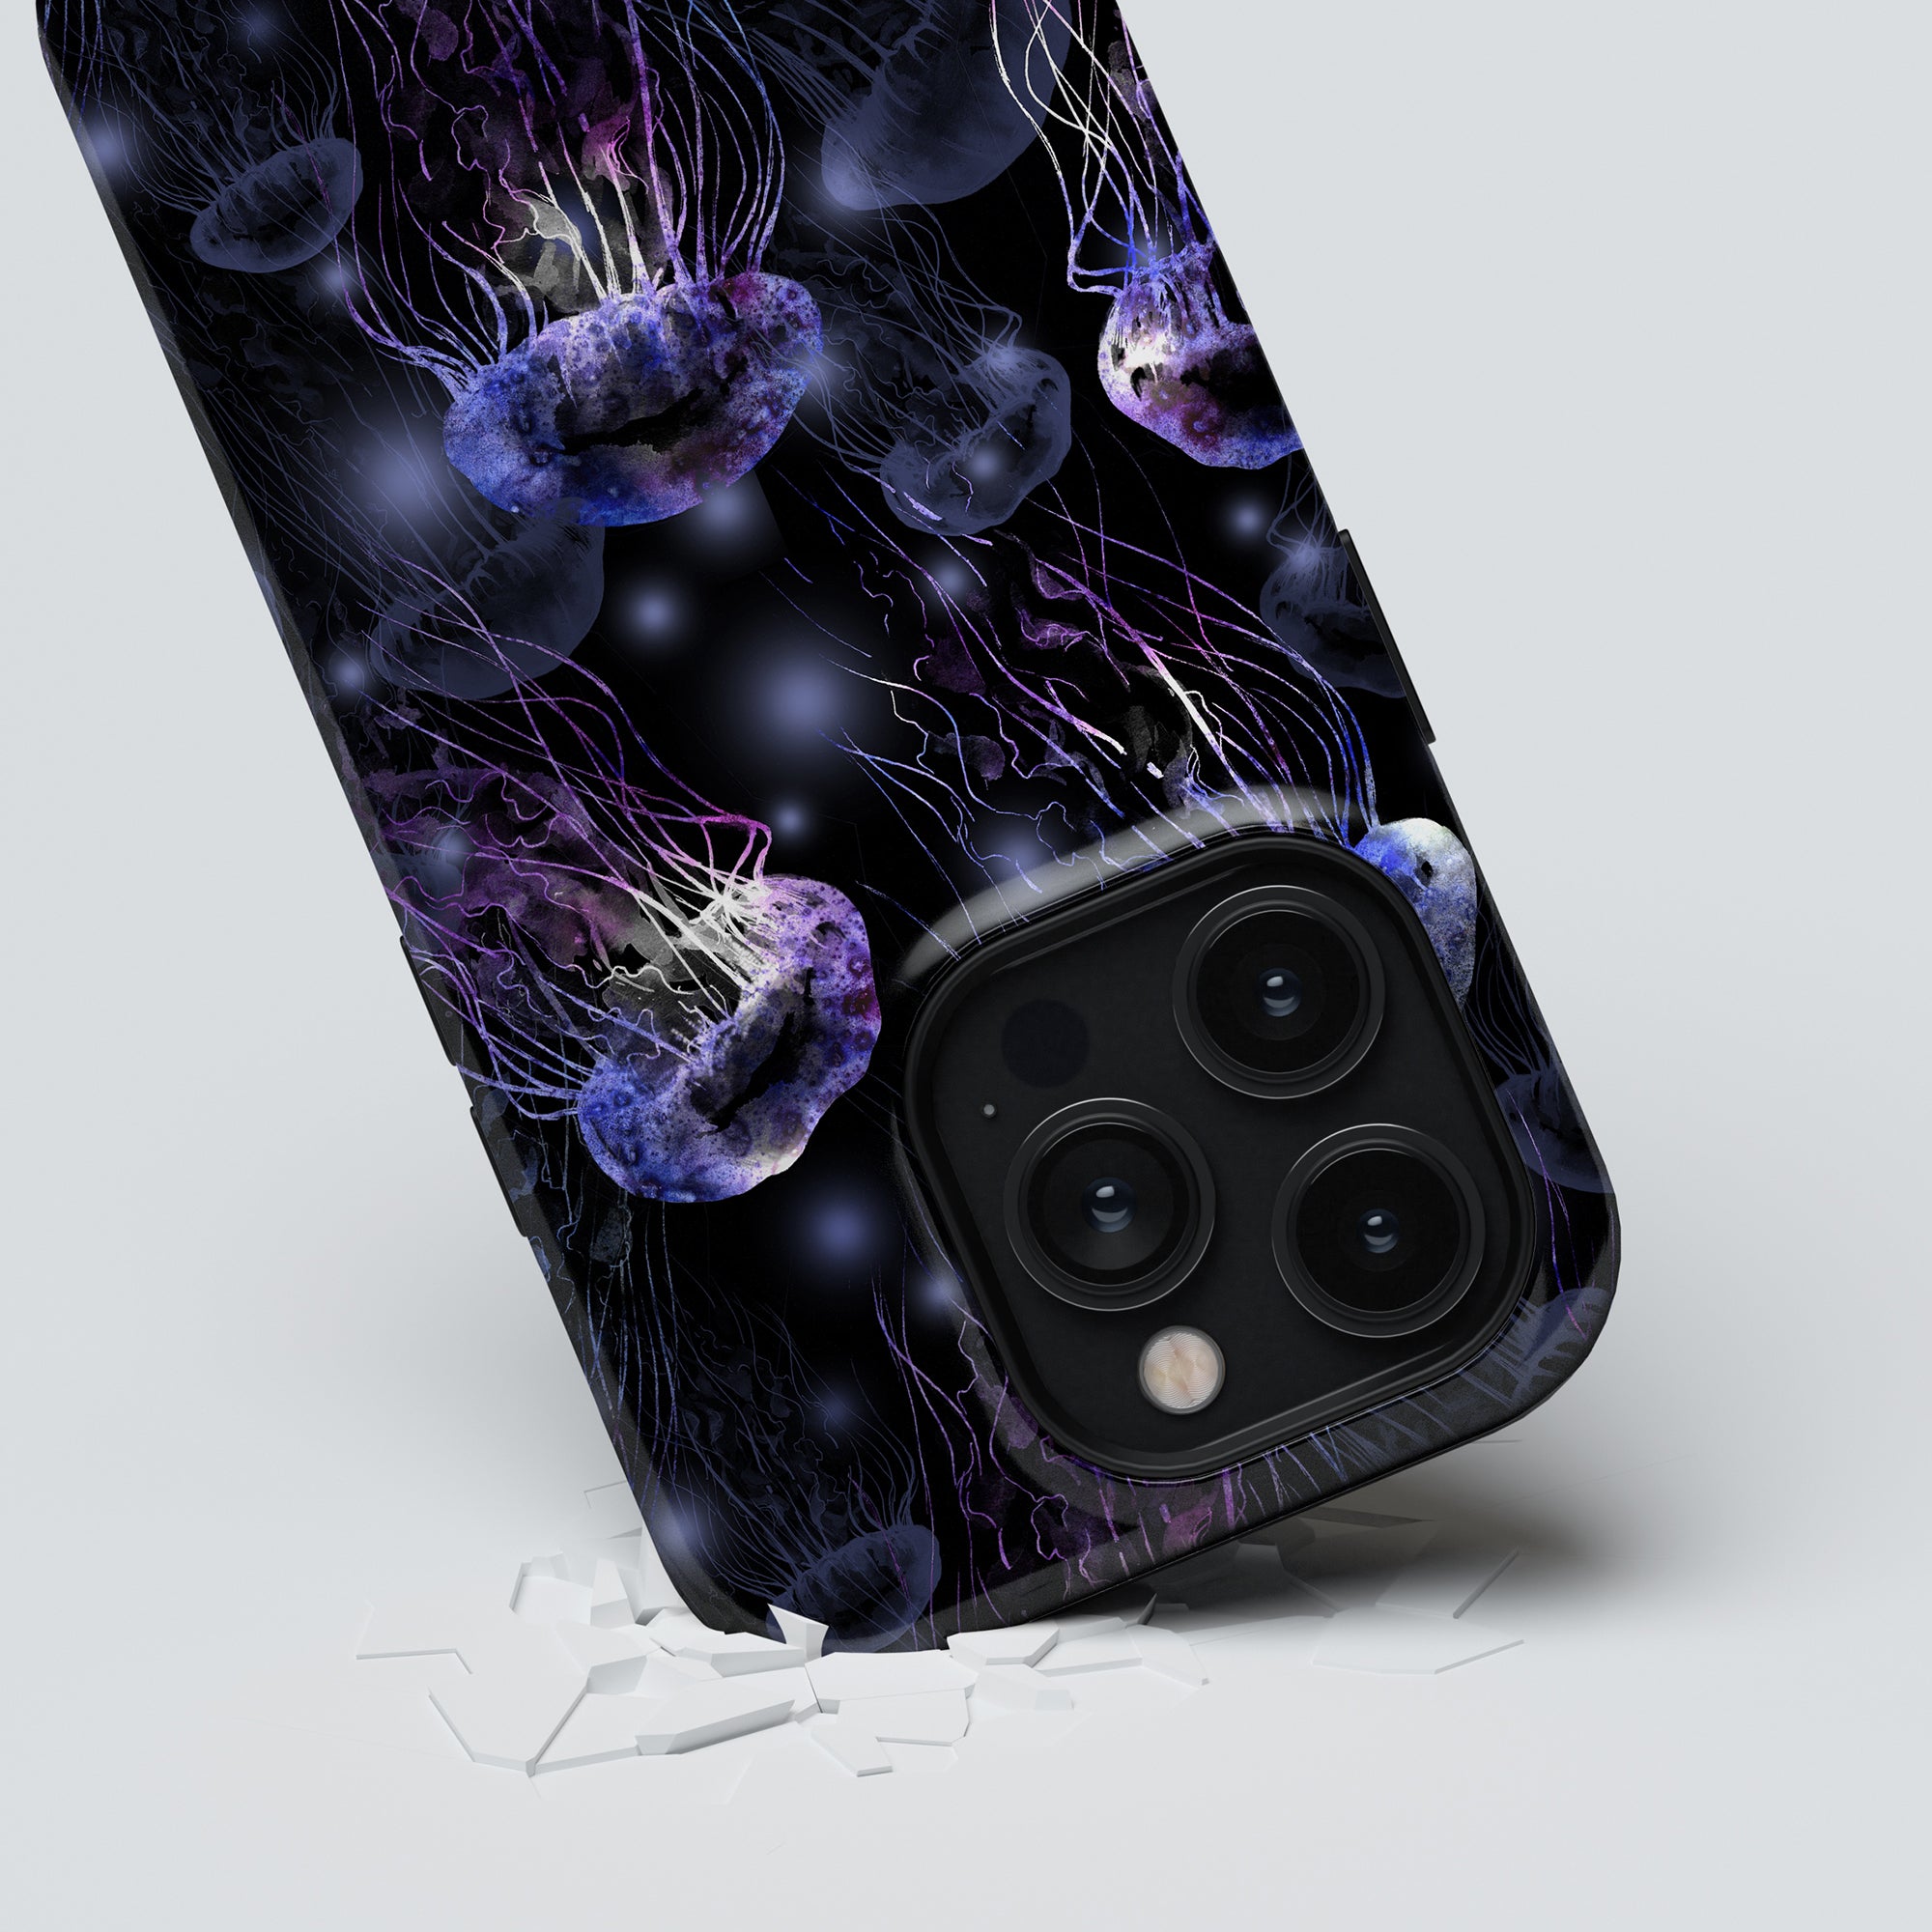 Smartphone with a Smack - Tough Case breaking through a glass surface, showcasing its rear cameras.